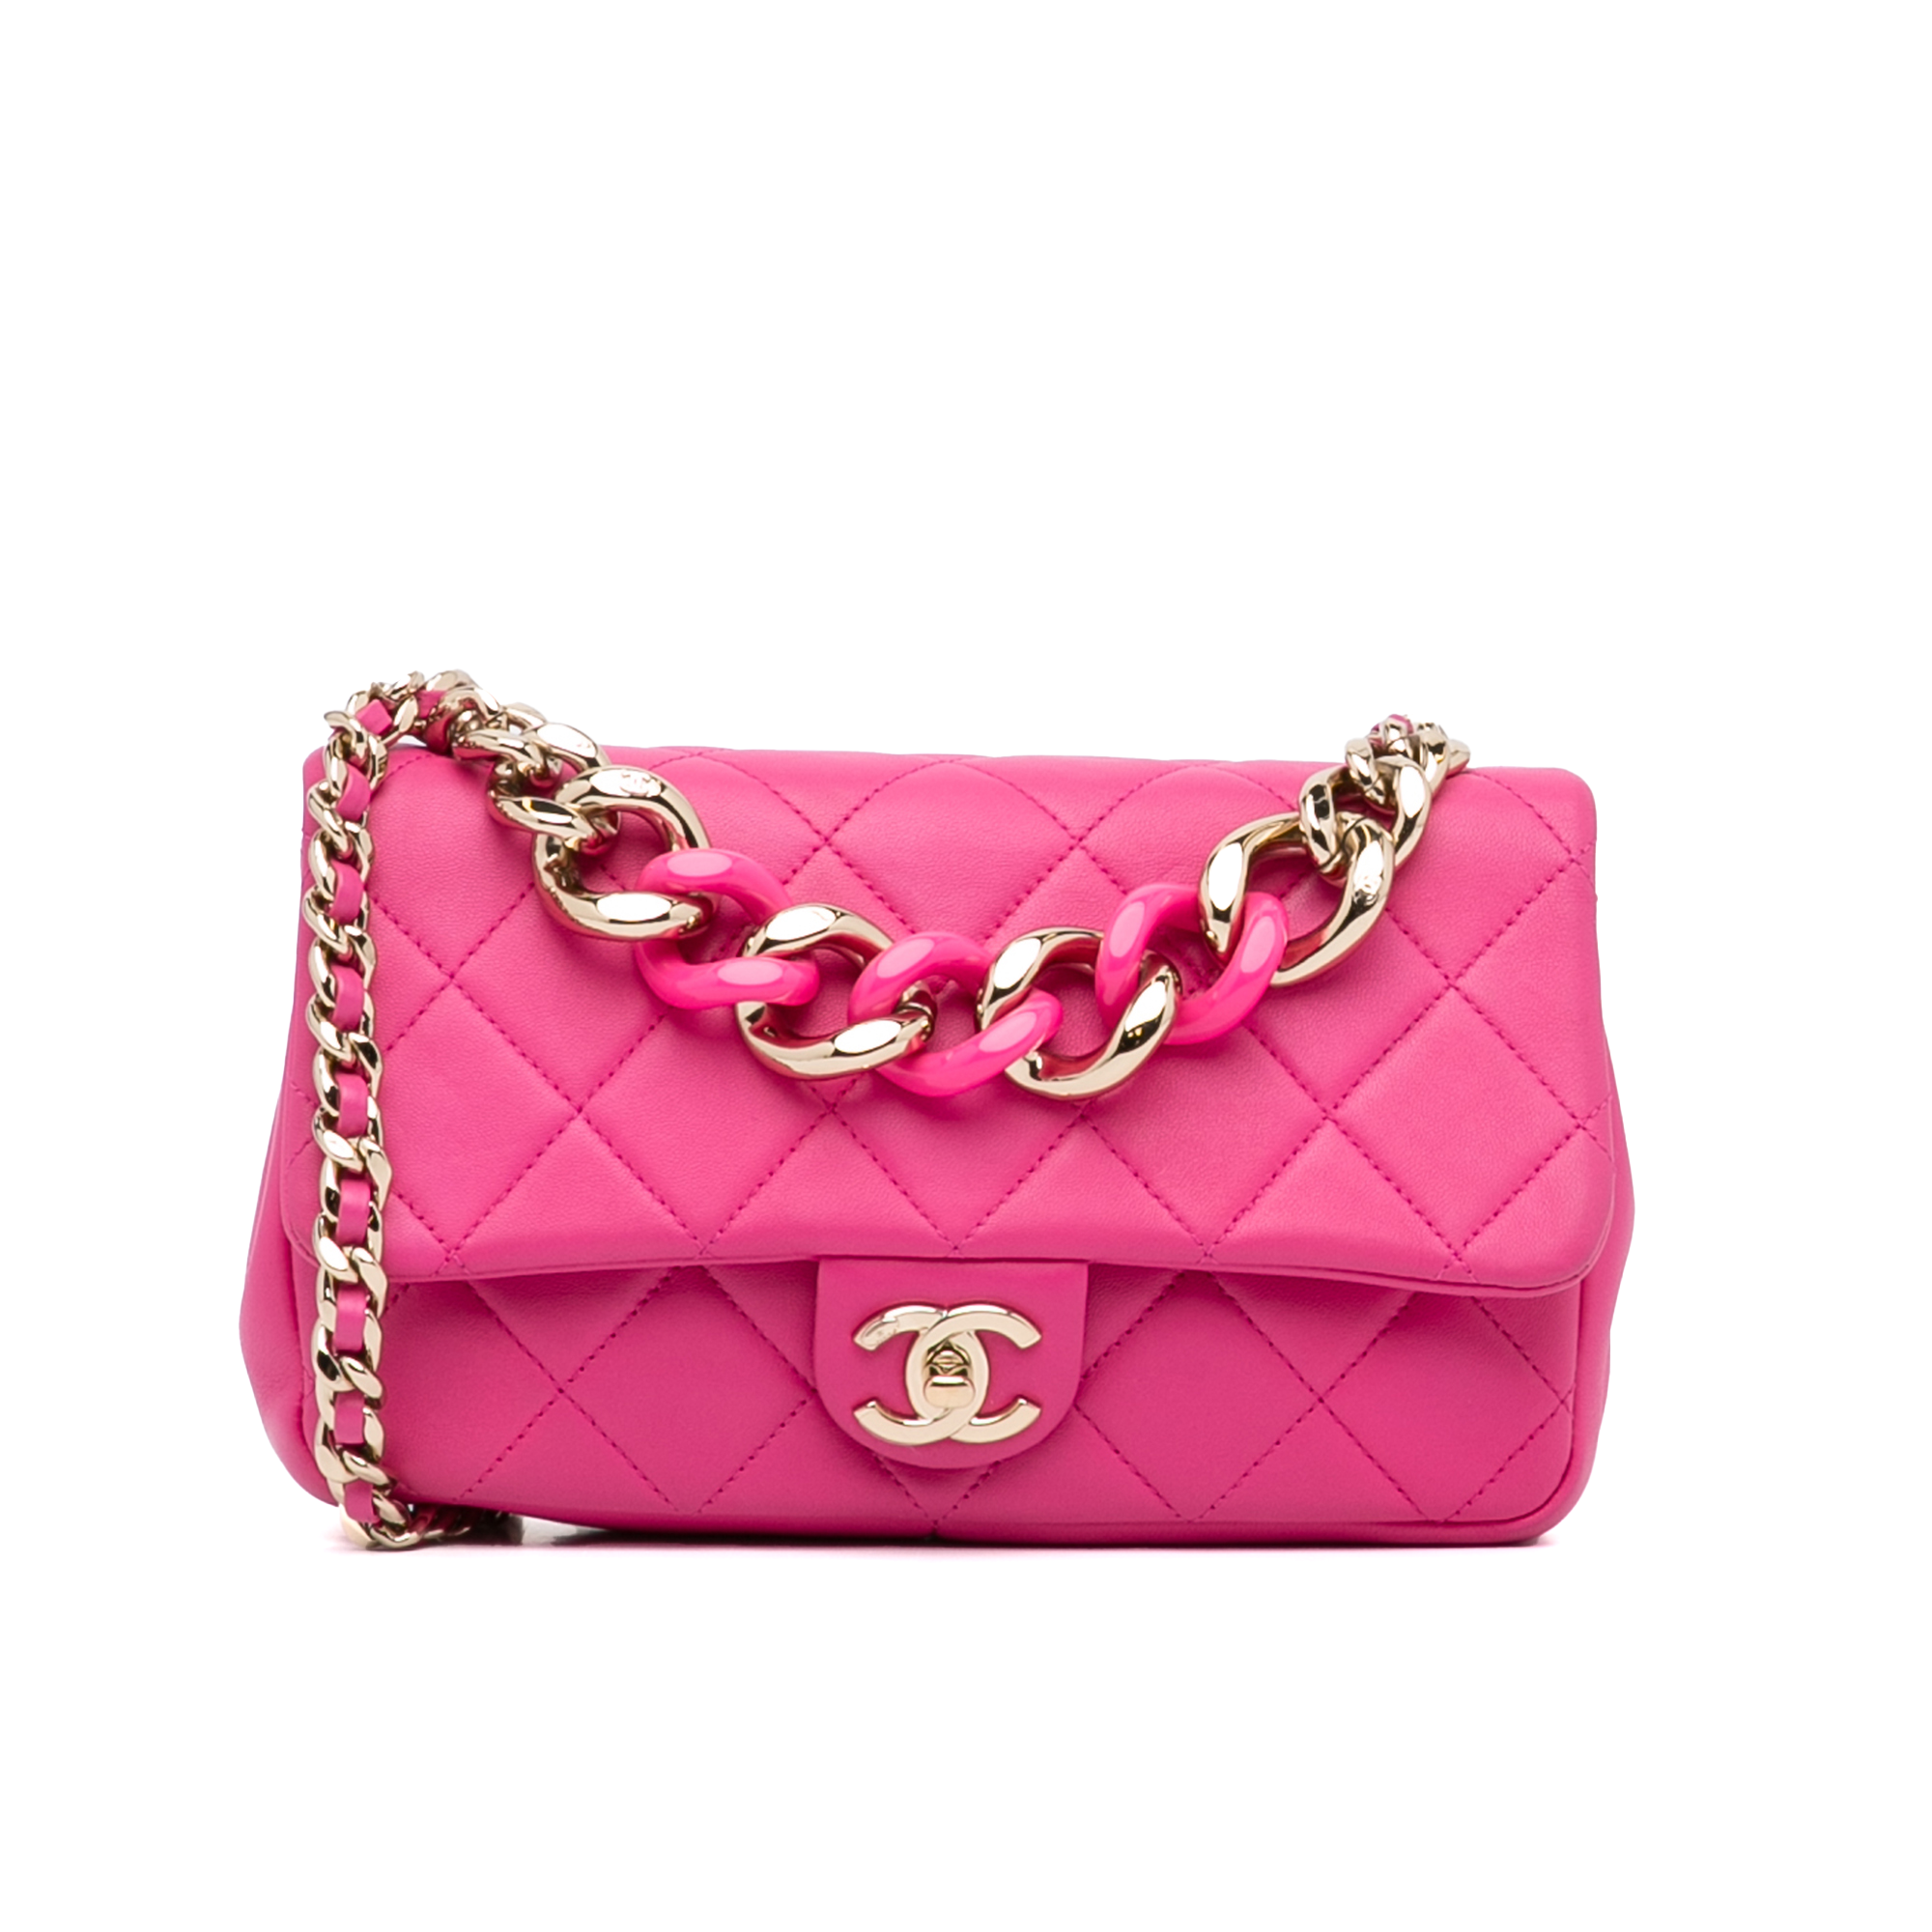 CHANEL Chanel Small Lambskin Quilted Resin Bi-Color Chain Flap Bag Pink - Vault 55